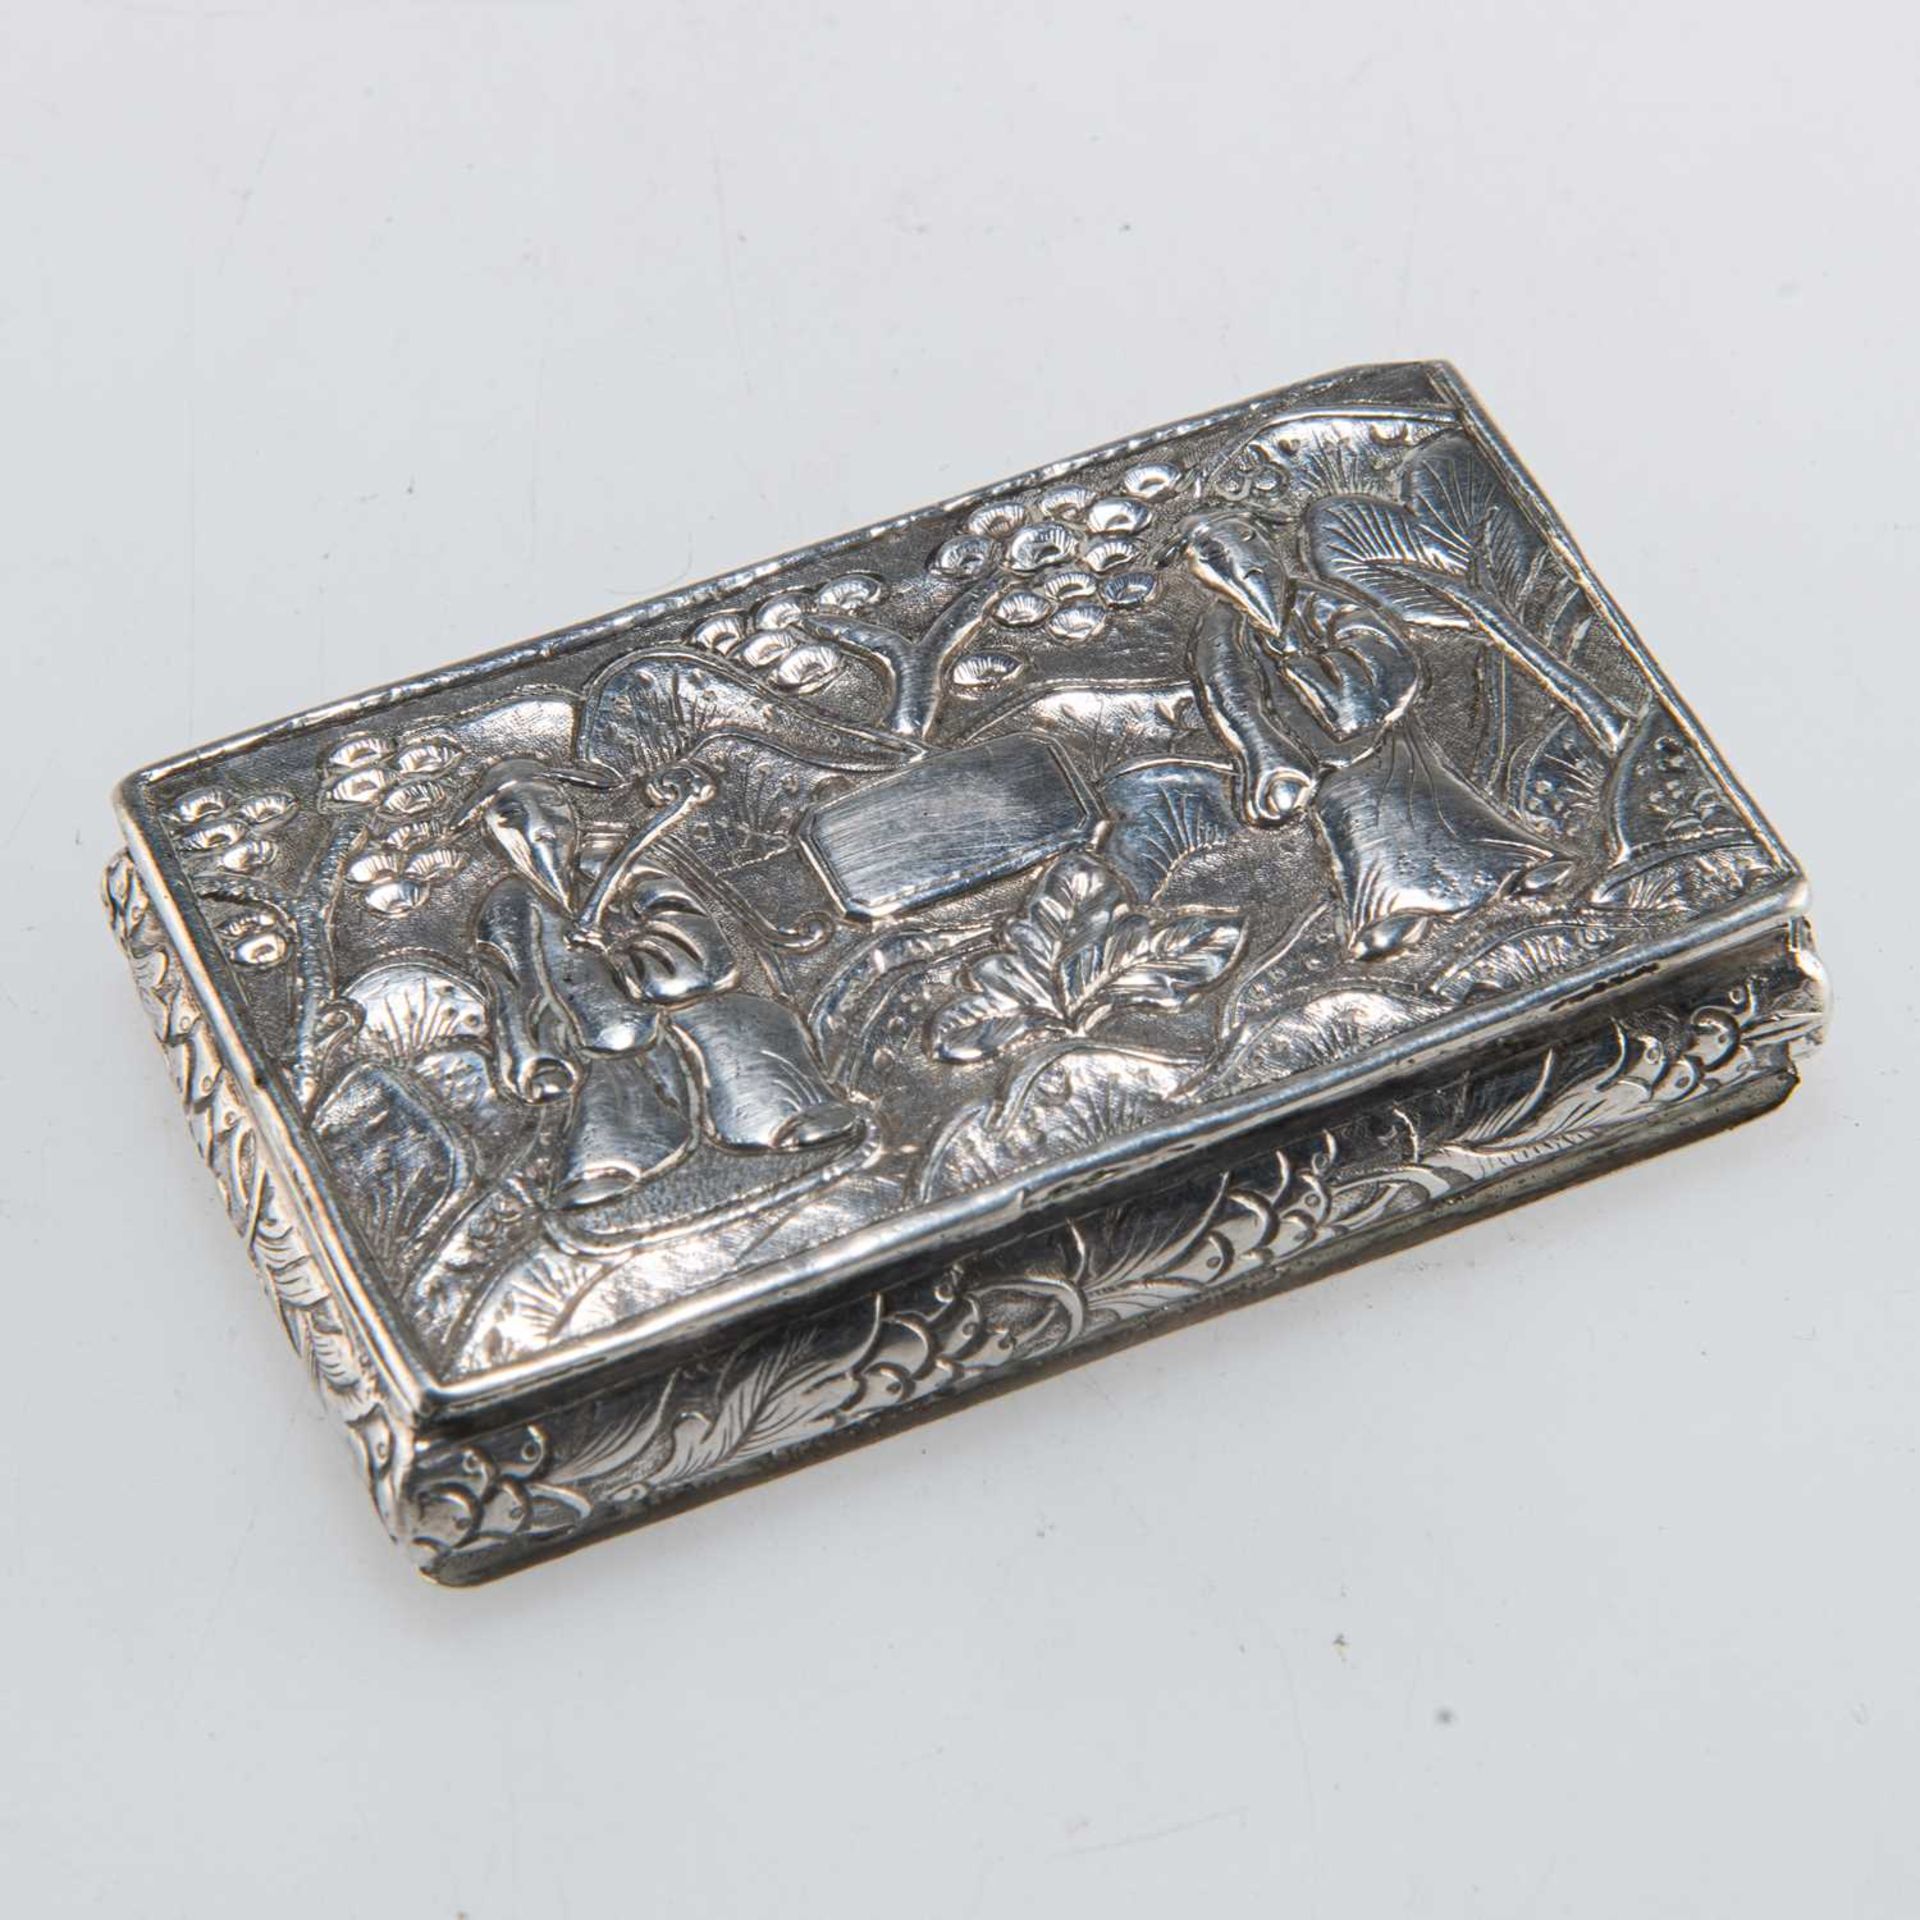 A 19TH CENTURY CHINESE EXPORT SILVER SNUFF BOX